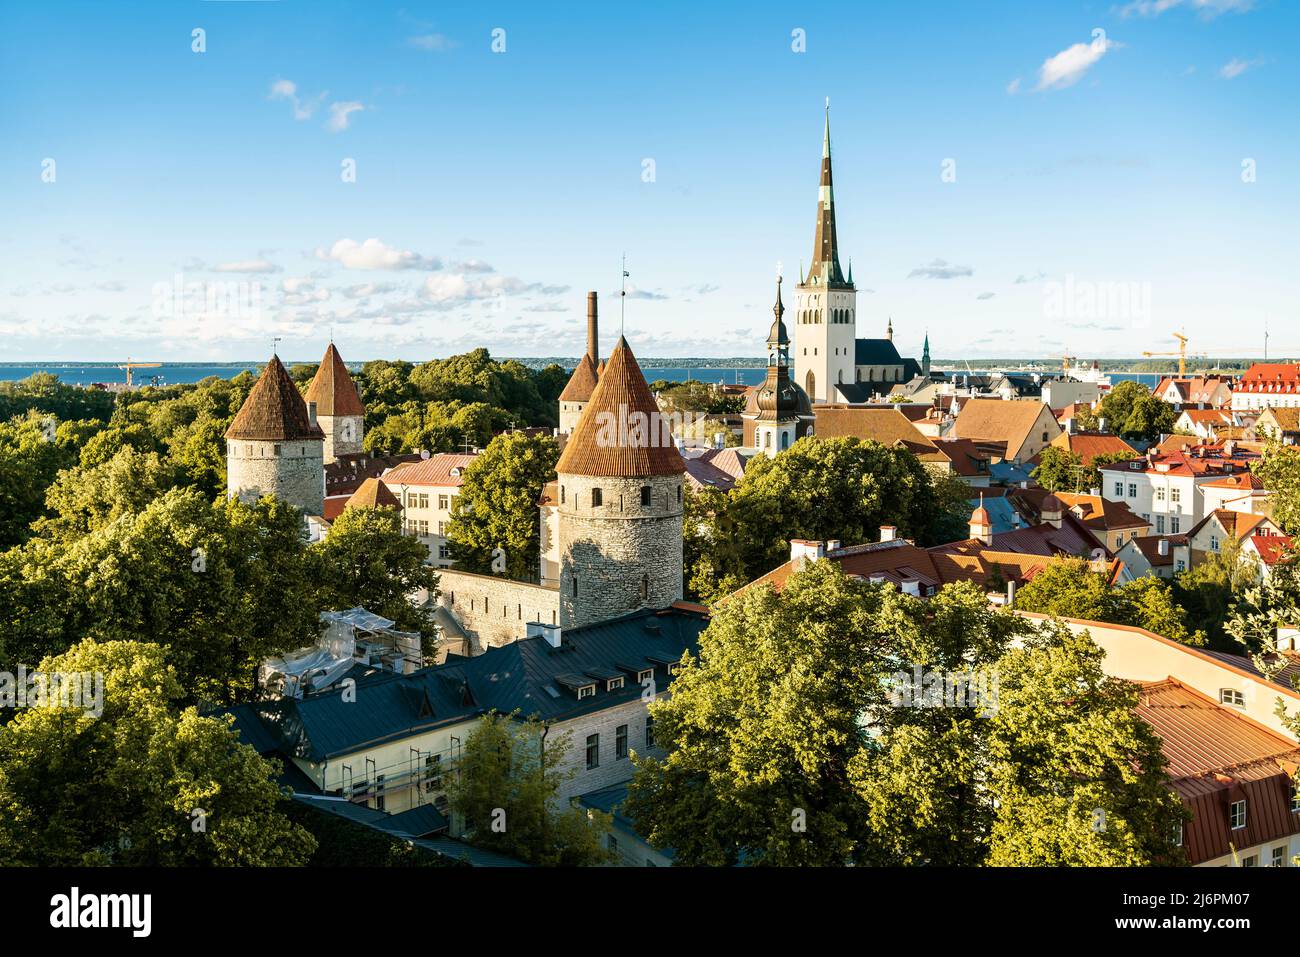 Tallinn, Estonia. Old town and city in summer. Baltic and nordic capital skyline in Europe. Historical castle and church. Downtown buildings. Stock Photo